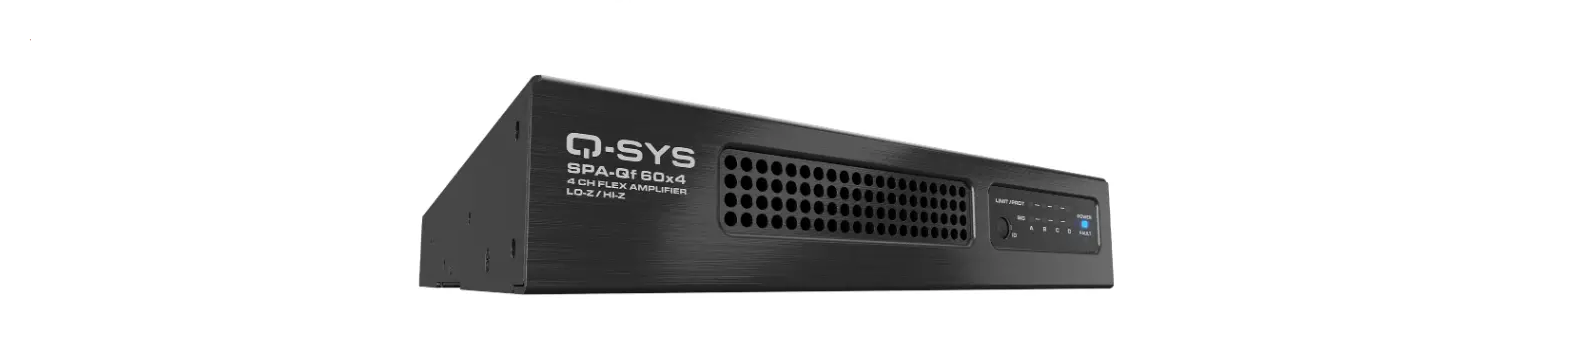 Q-SYS SPA-Qf Series Network Amplifiers